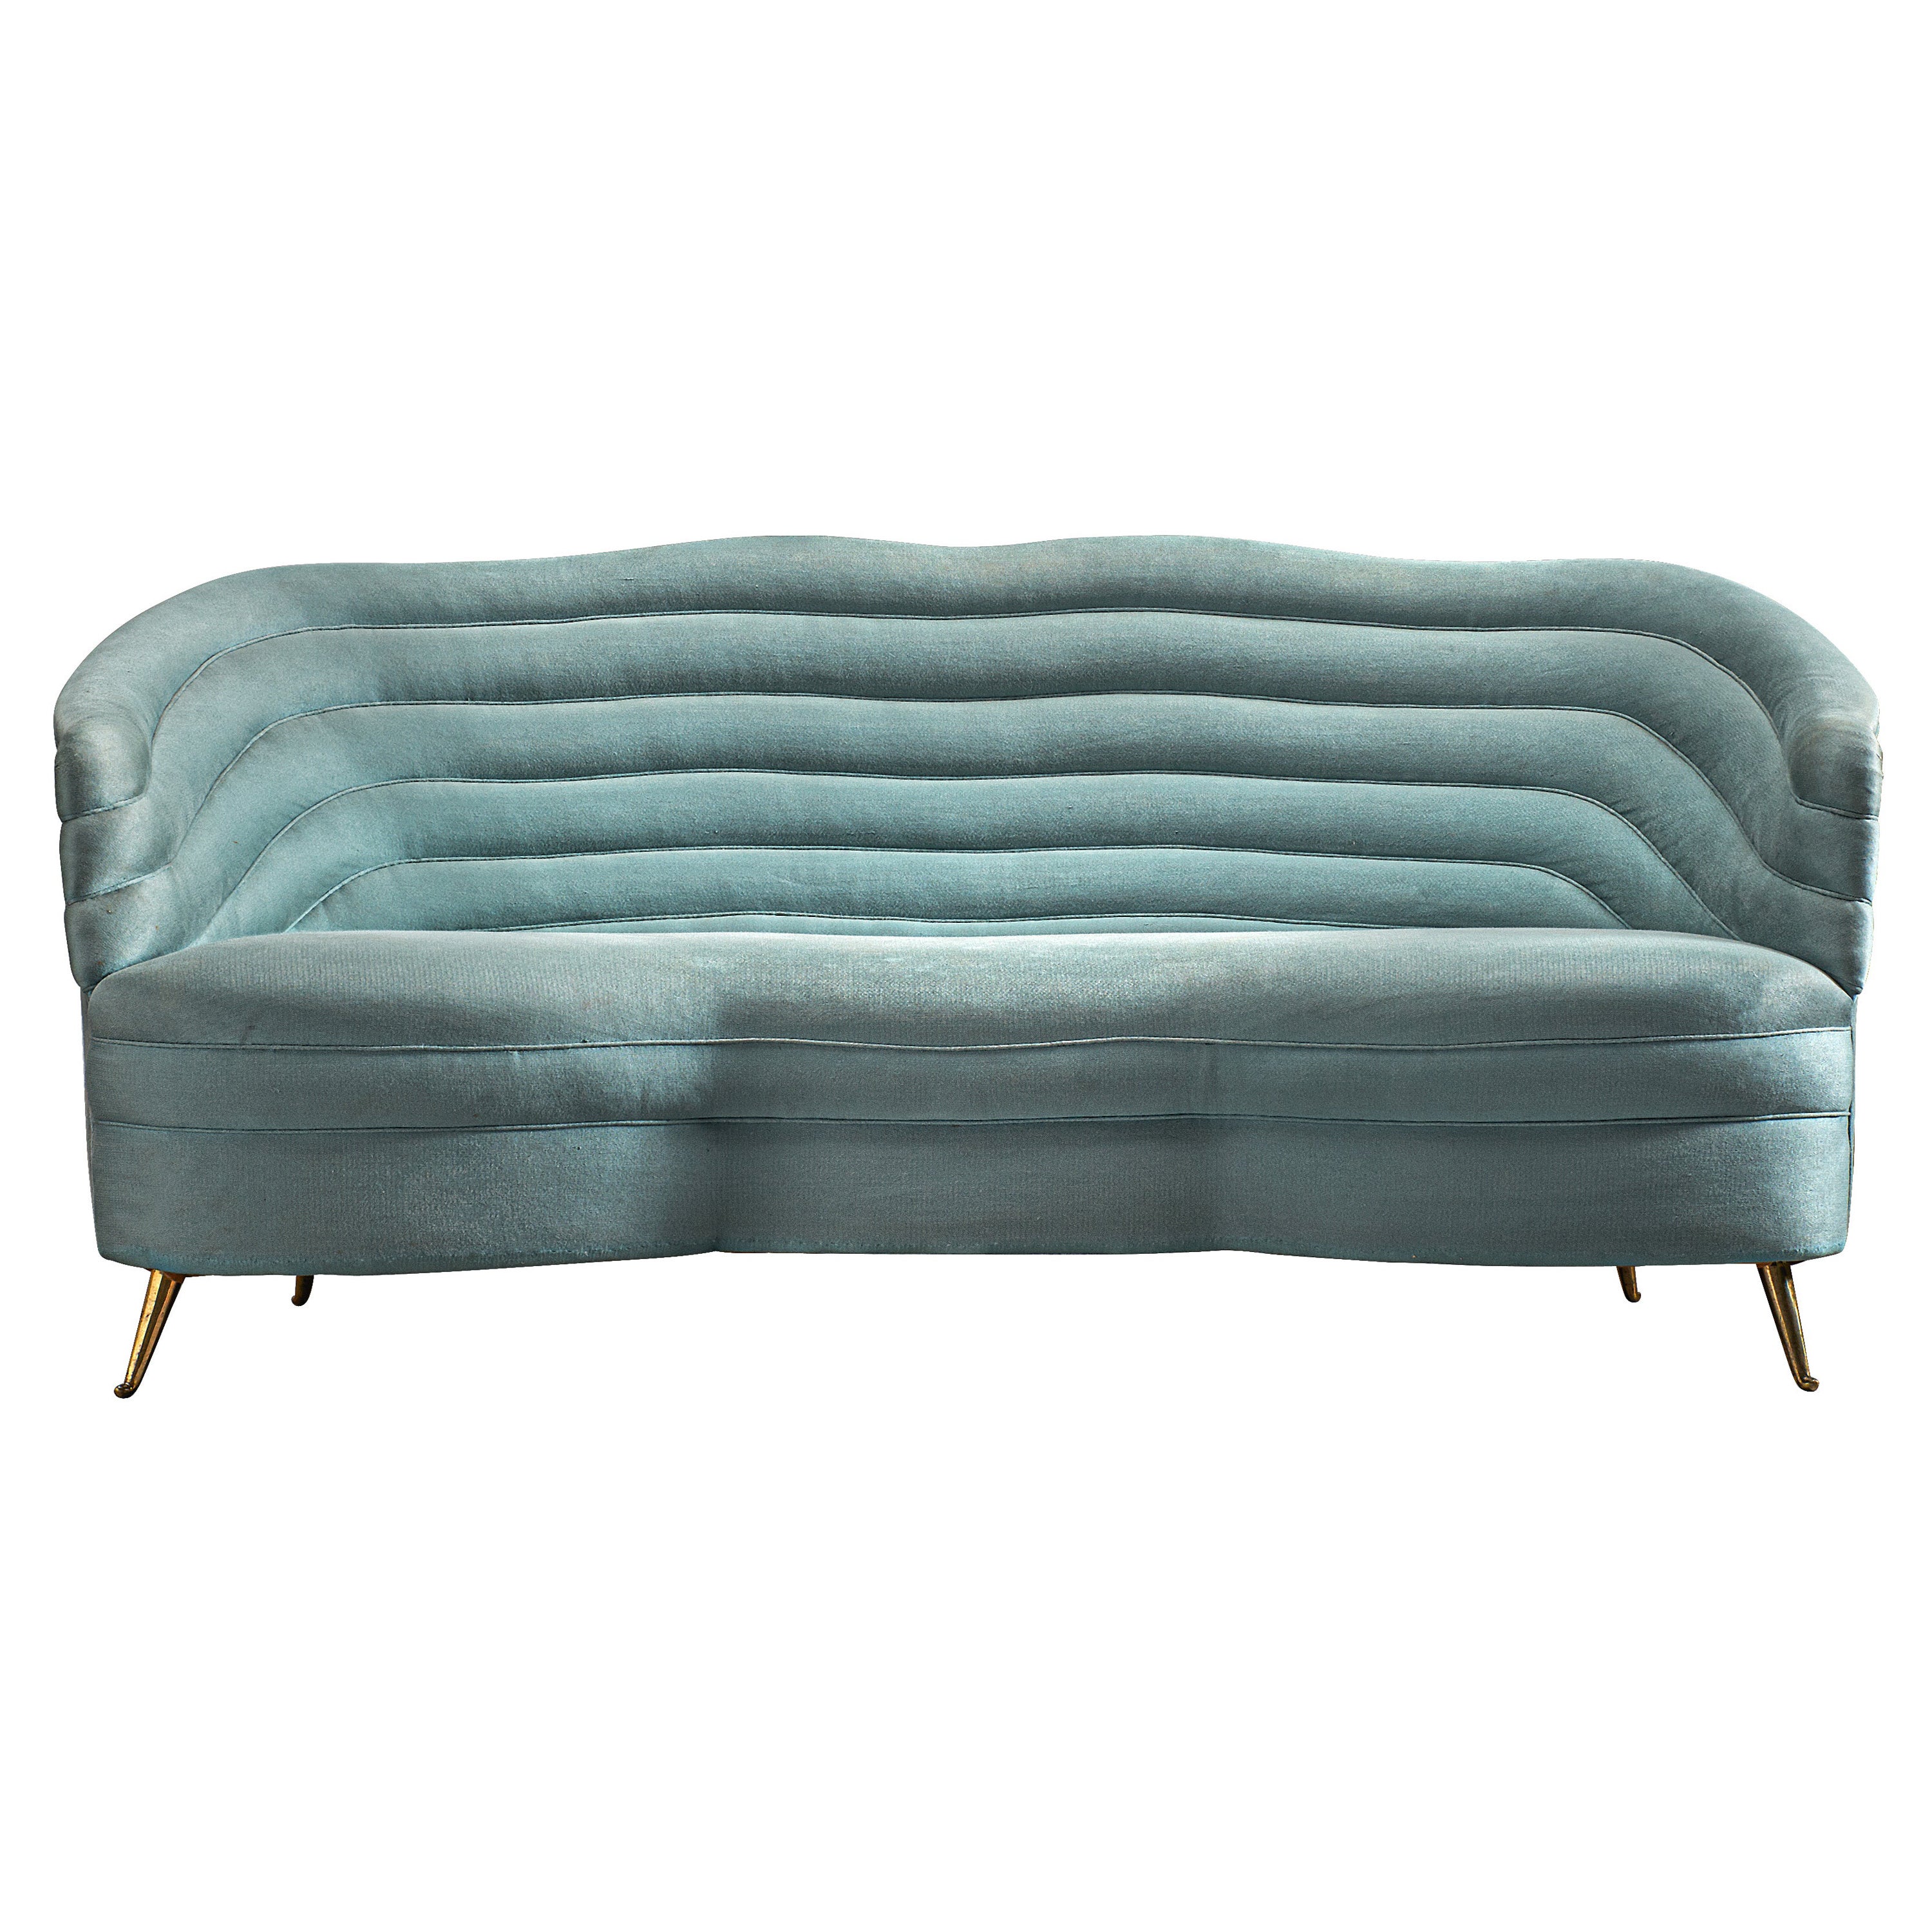 Andrea Busiri Vici Sofa in Turquoise Blue Upholstery